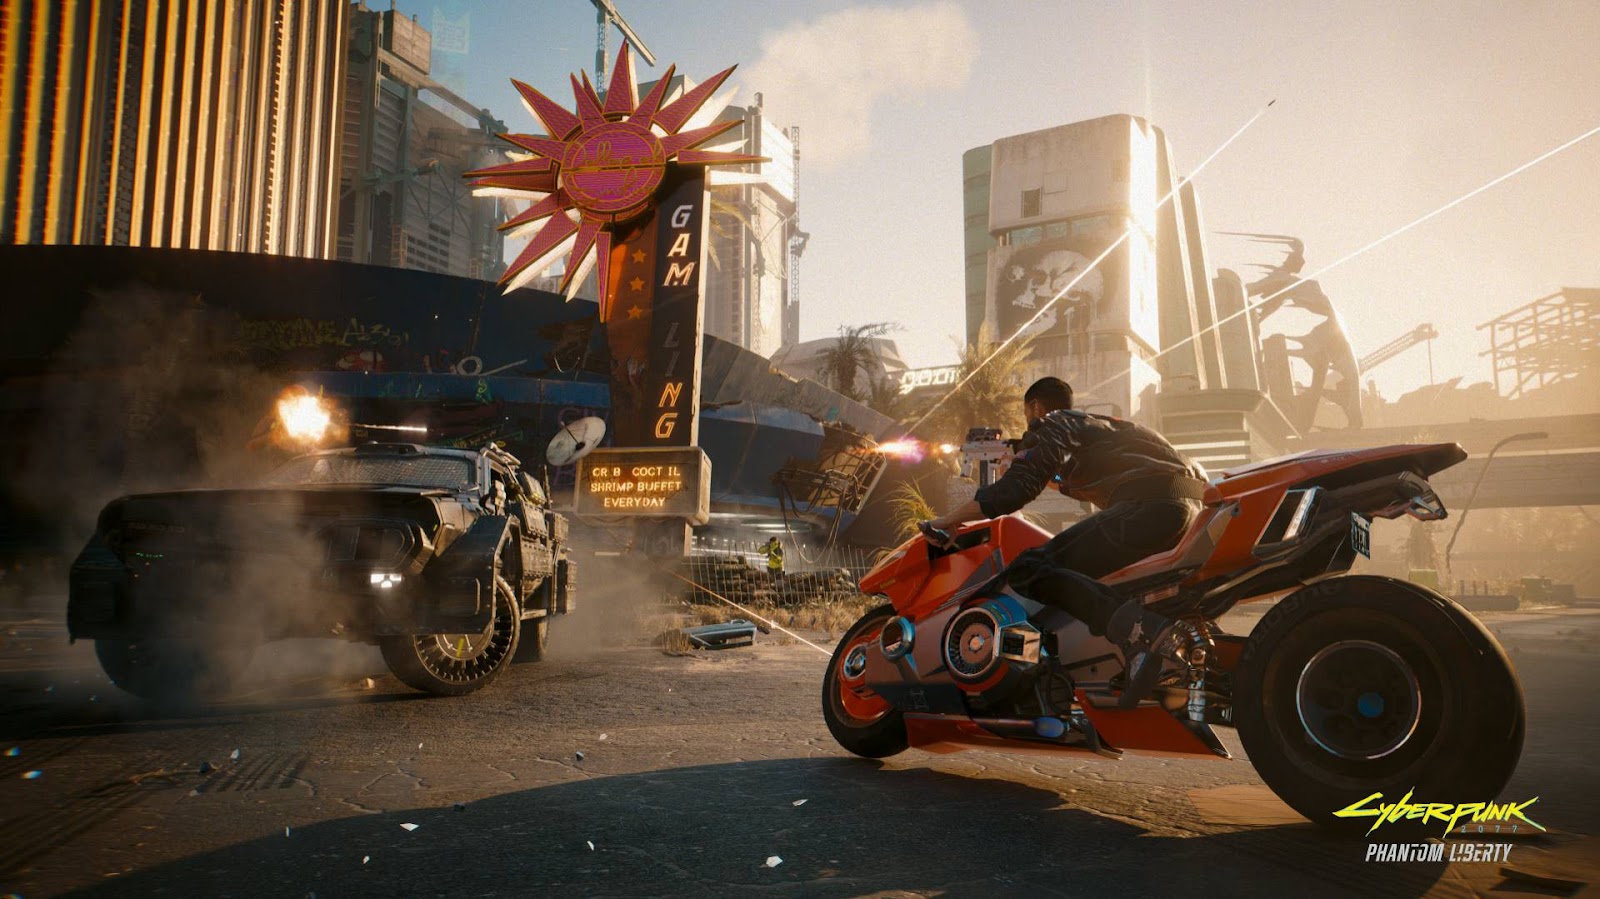 Cyberpunk 2077 Ultimate Edition box announced for PS5, Xbox and PC